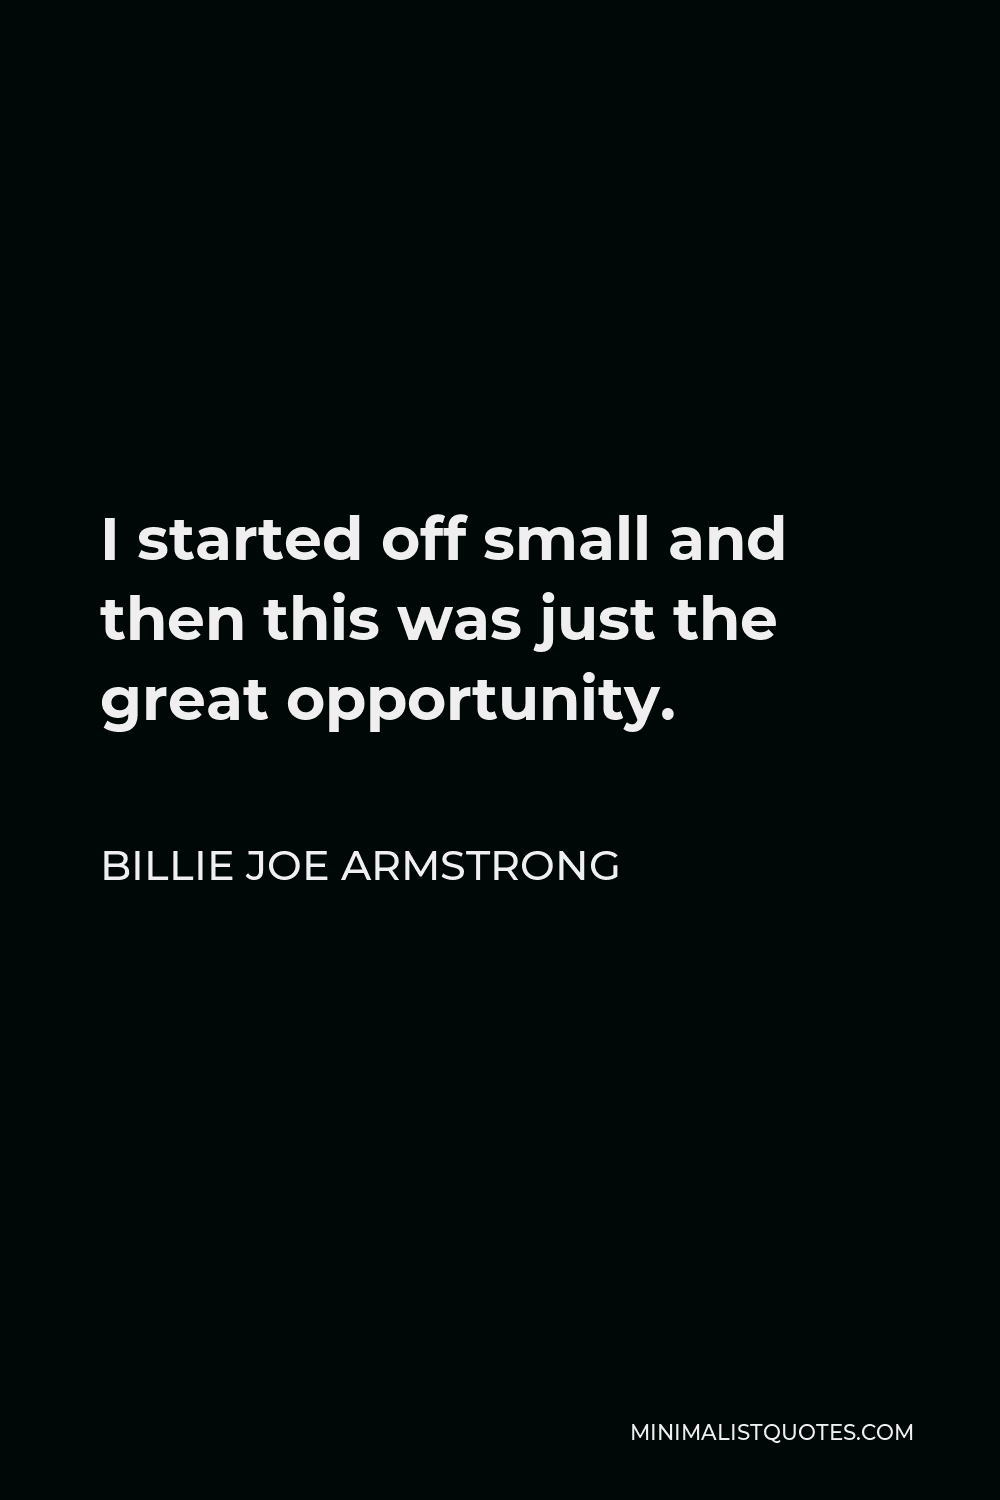 Billie Joe Armstrong Quote - I started off small and then this was just the great opportunity.